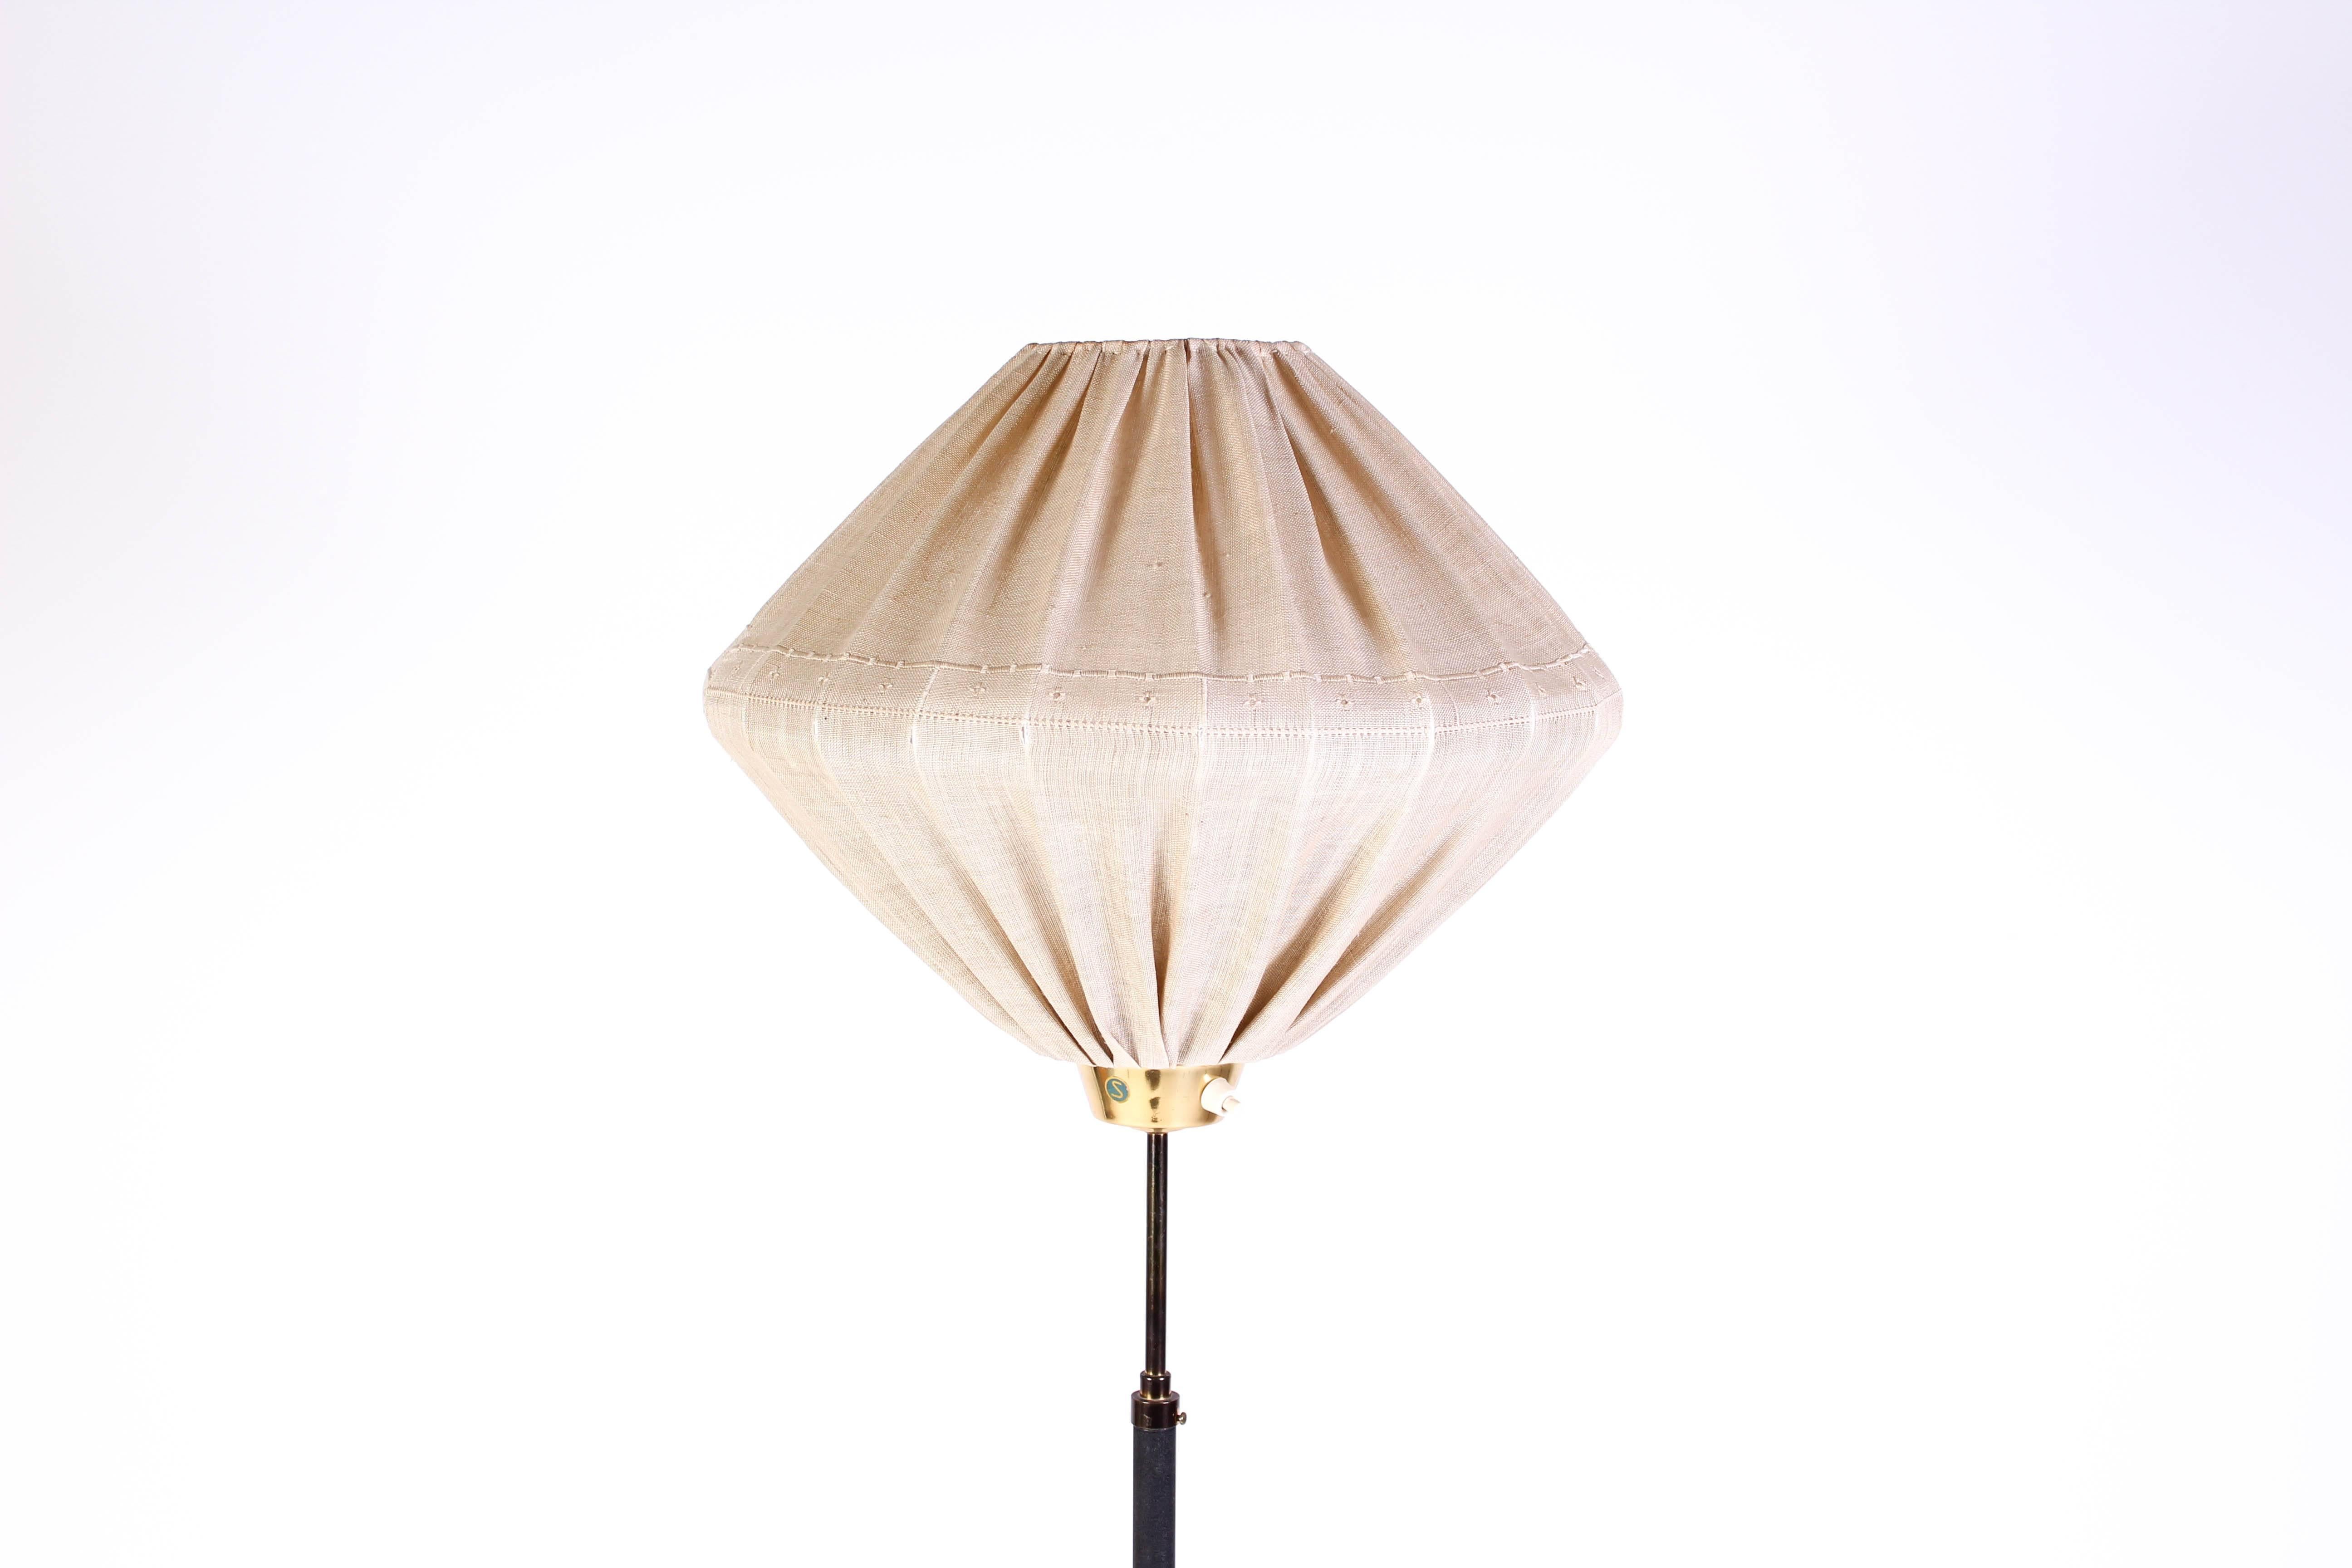 Midcentury floor lamp made by Swedish manufacturer Ewå from Värnamo. The lamp is made out of cast iron and brass with original shade. 

Very good vintage condition with signs of usage on lamp and shade.